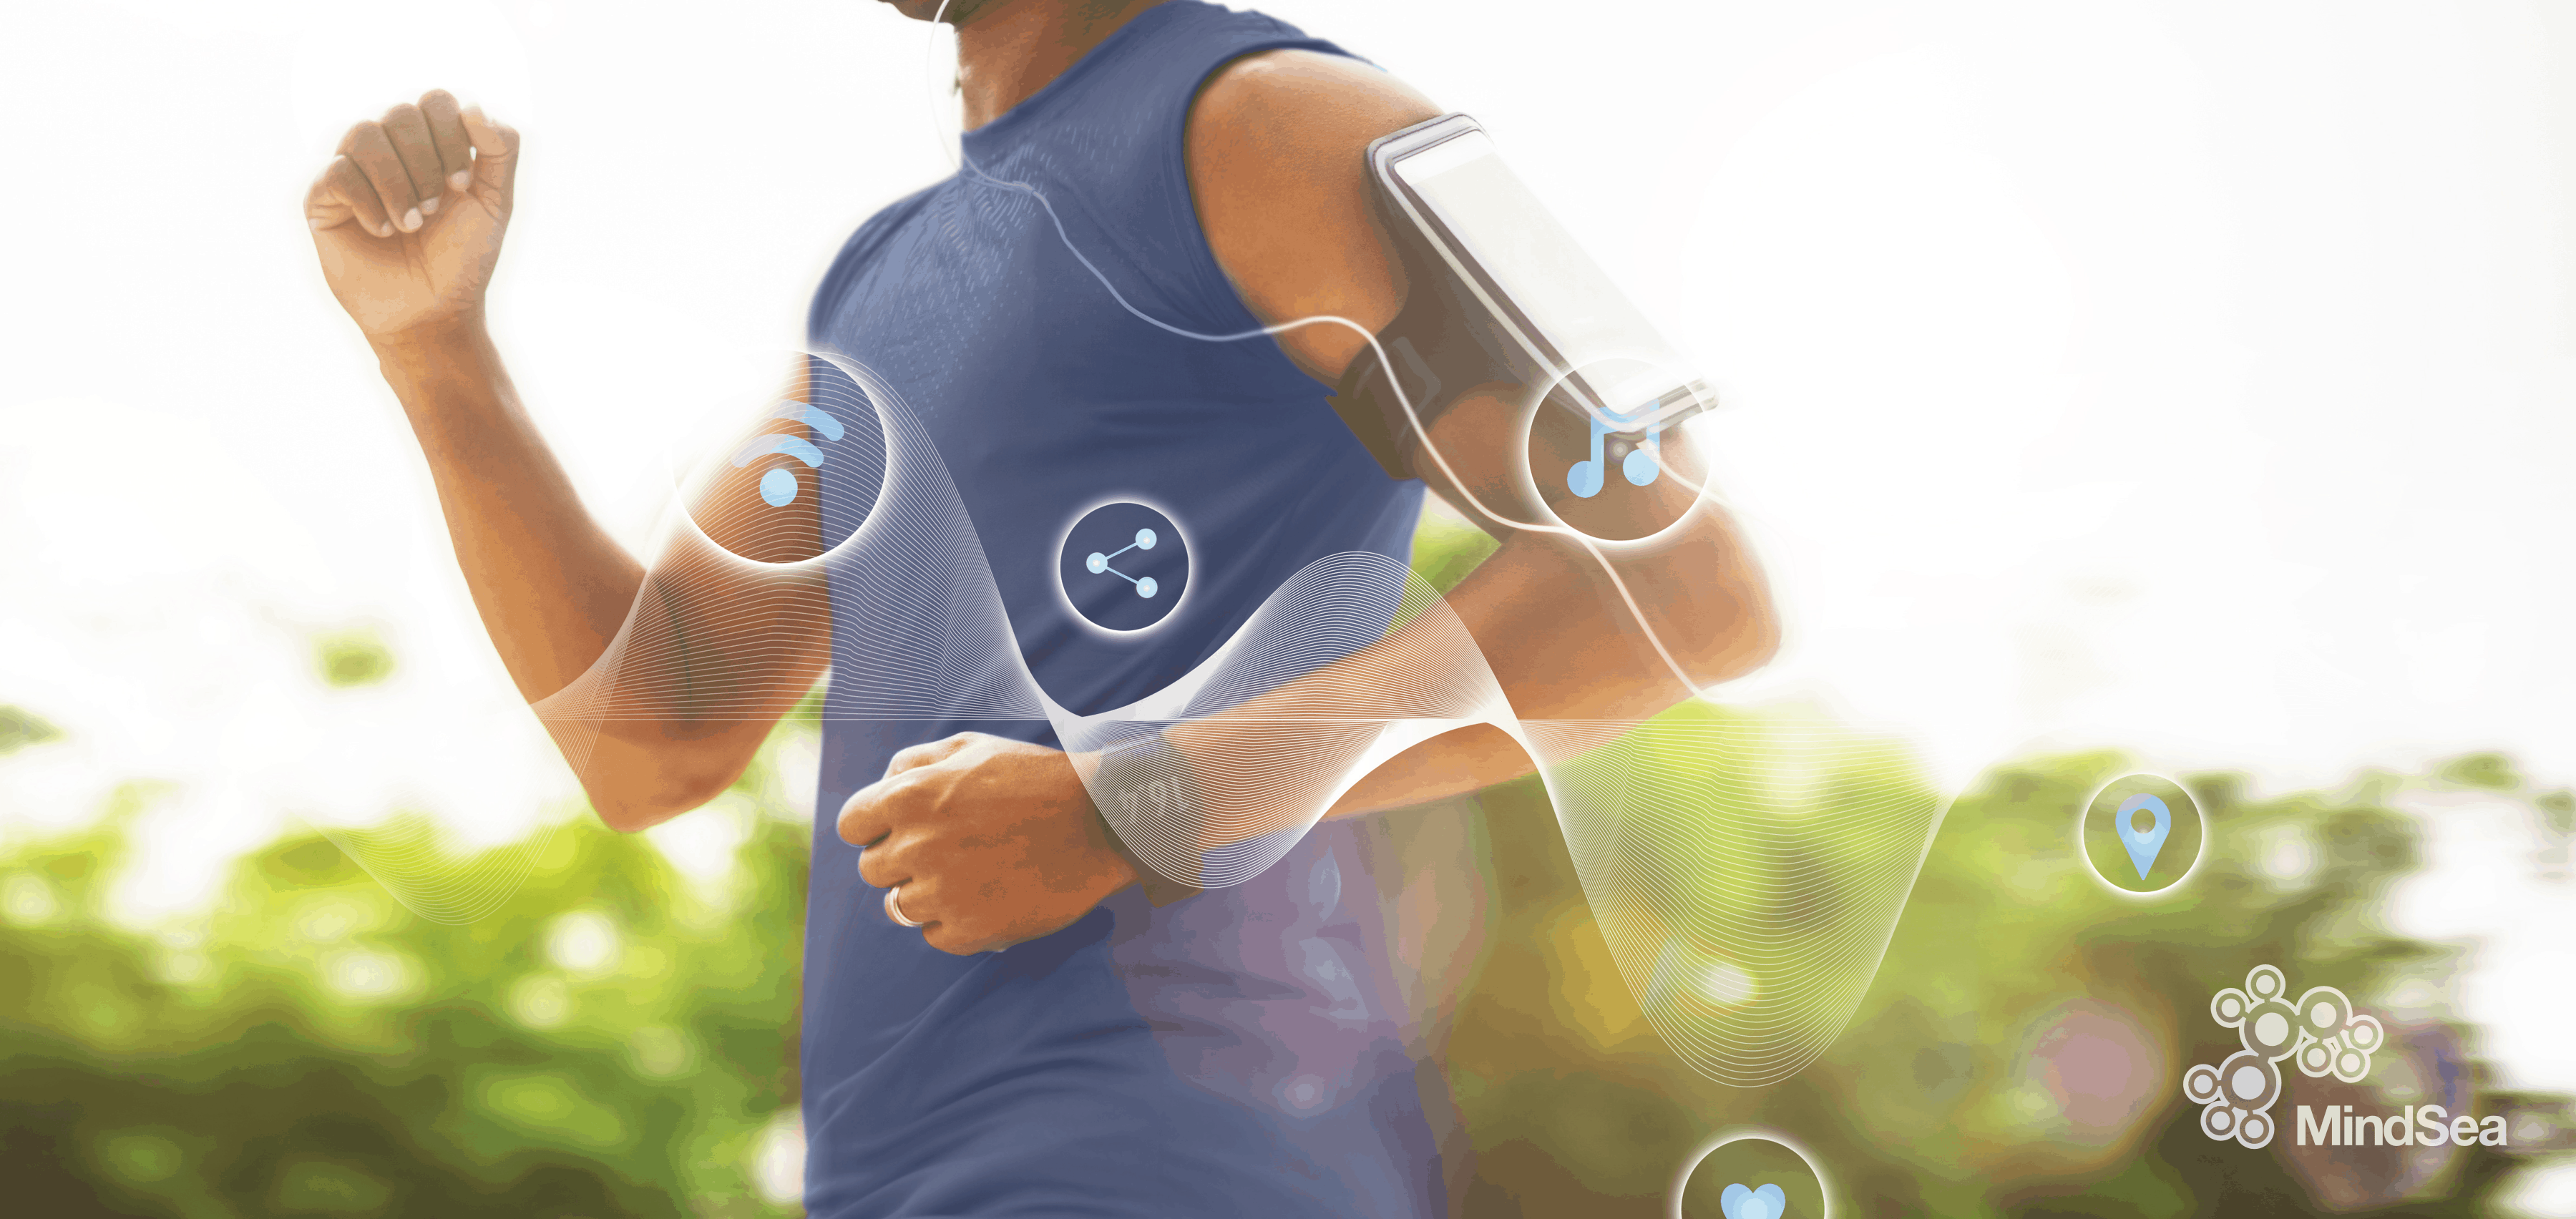 Smartphone Sensors for Health and Wellness Mobile Apps: An Explainer